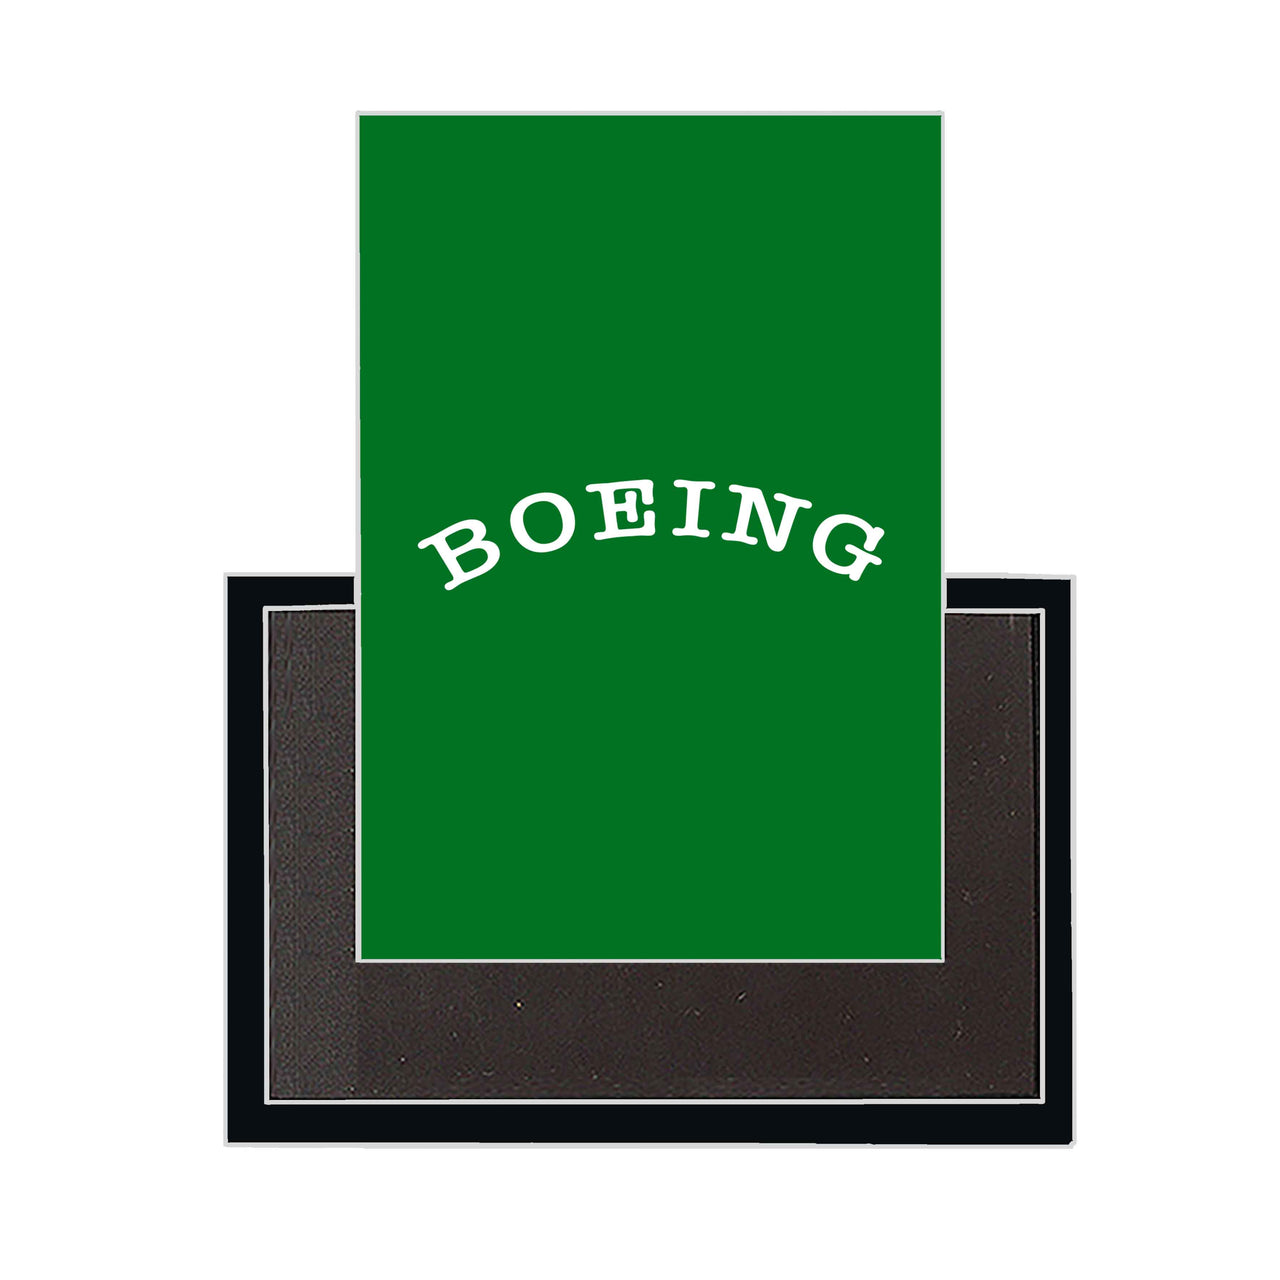 Special BOEING Text Designed Magnets